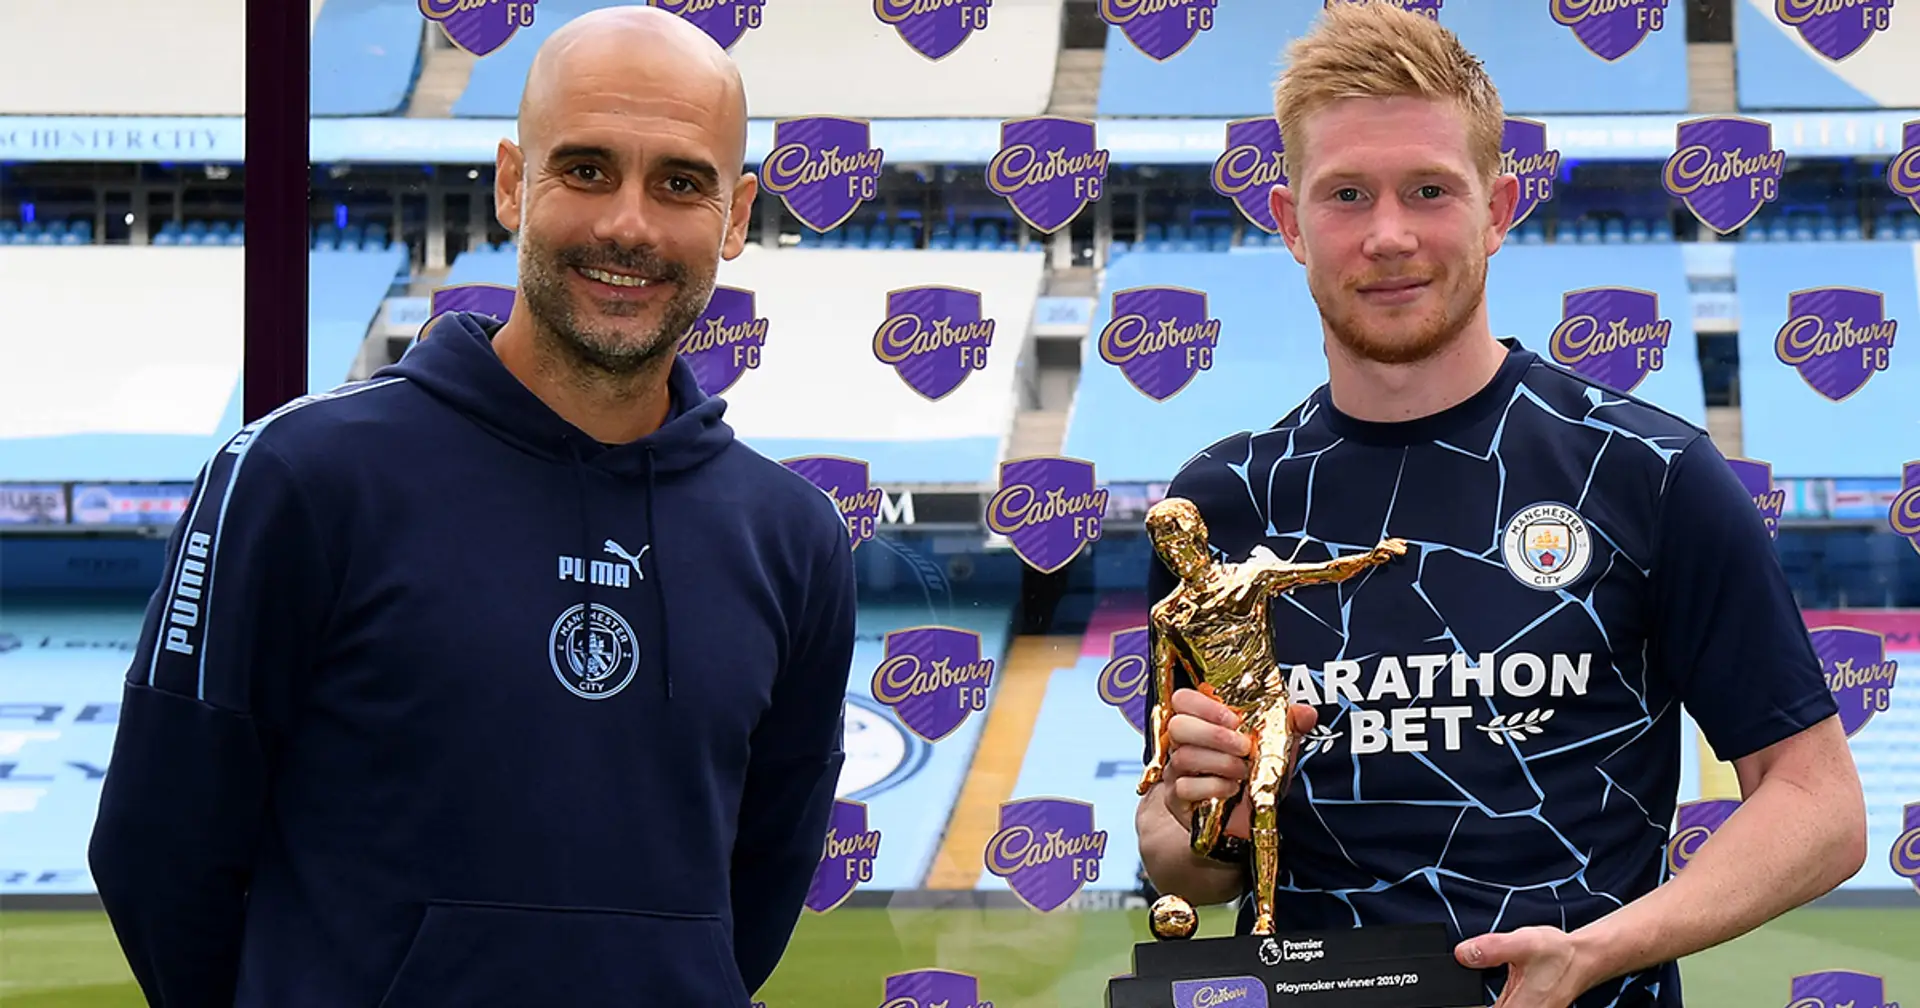 OFFICIAL: Kevin De Bruyne wins 2019/20 Premier League Playmaker award, matches Thierry Henry's record